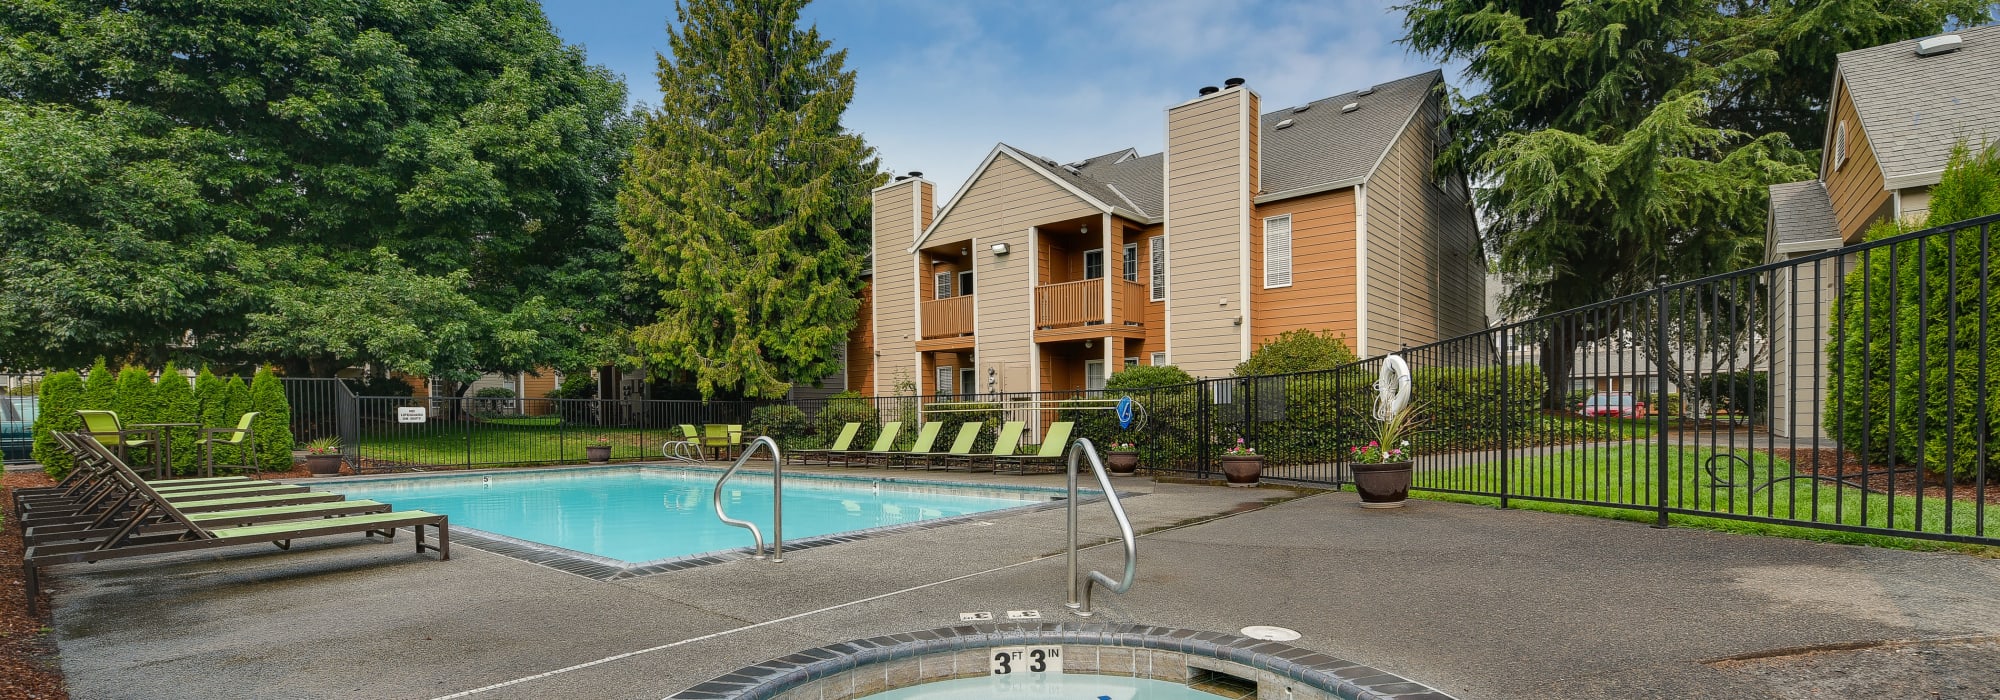 Virtual tours of Carriage House Apartments in Vancouver, Washington